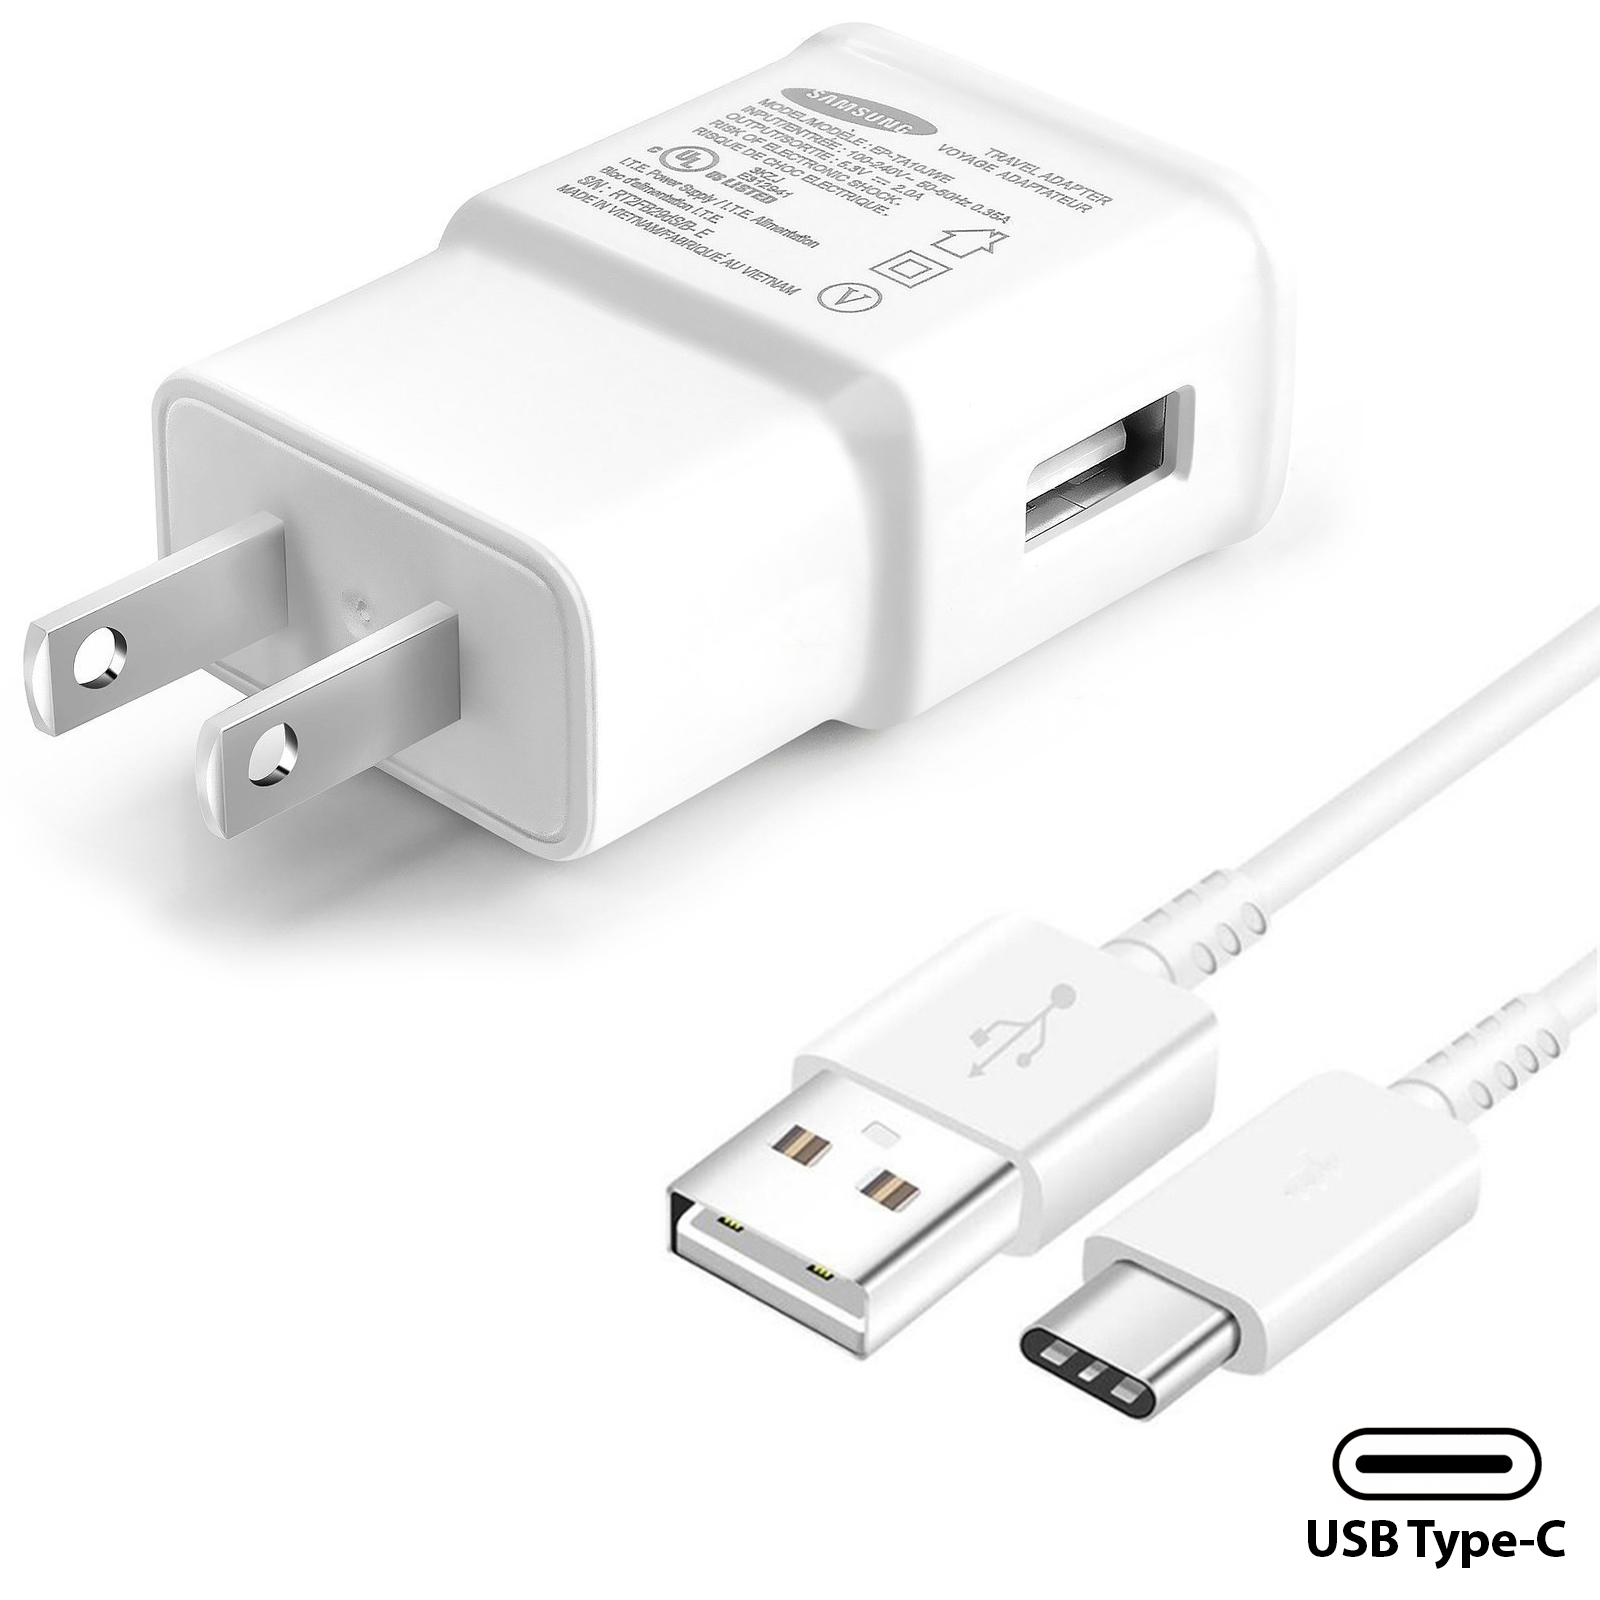 Samsung OEM Adaptive Fast Wall Charger kit with USB Type-C Cable Compatible with Samsung Galaxy S10/ S10 Plus/Note 8/ Note 9/ Note 10 Lg G6 G7 G8 ThinQ V30 V40 V50 (White) - image 3 of 3